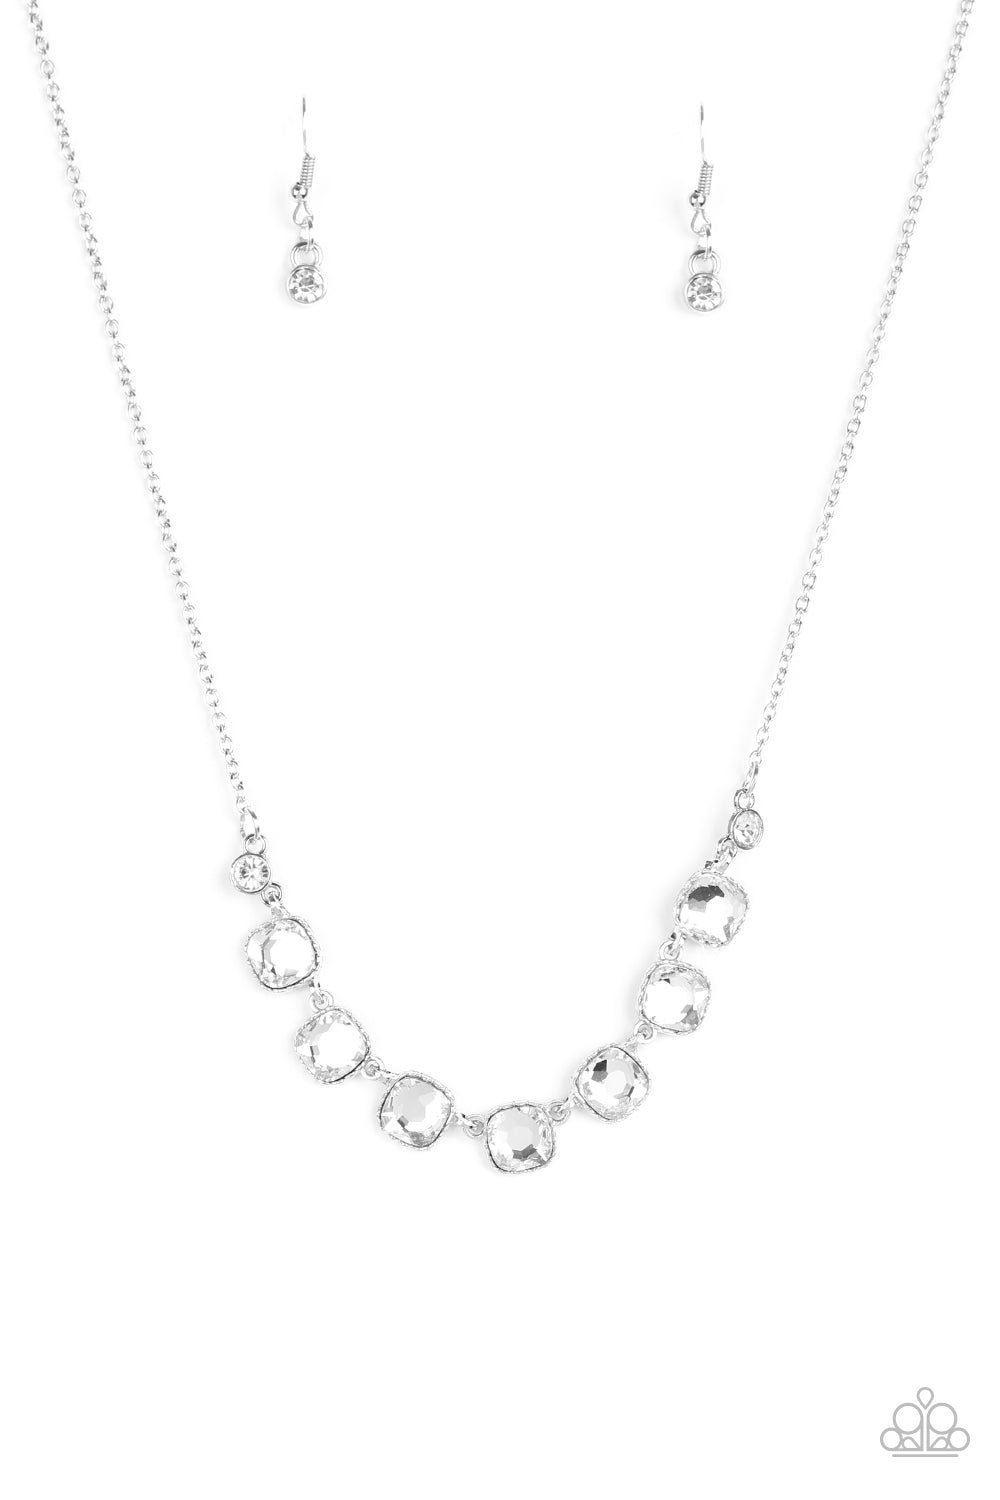 DELUXE LUXE - SILVER NECKLACE